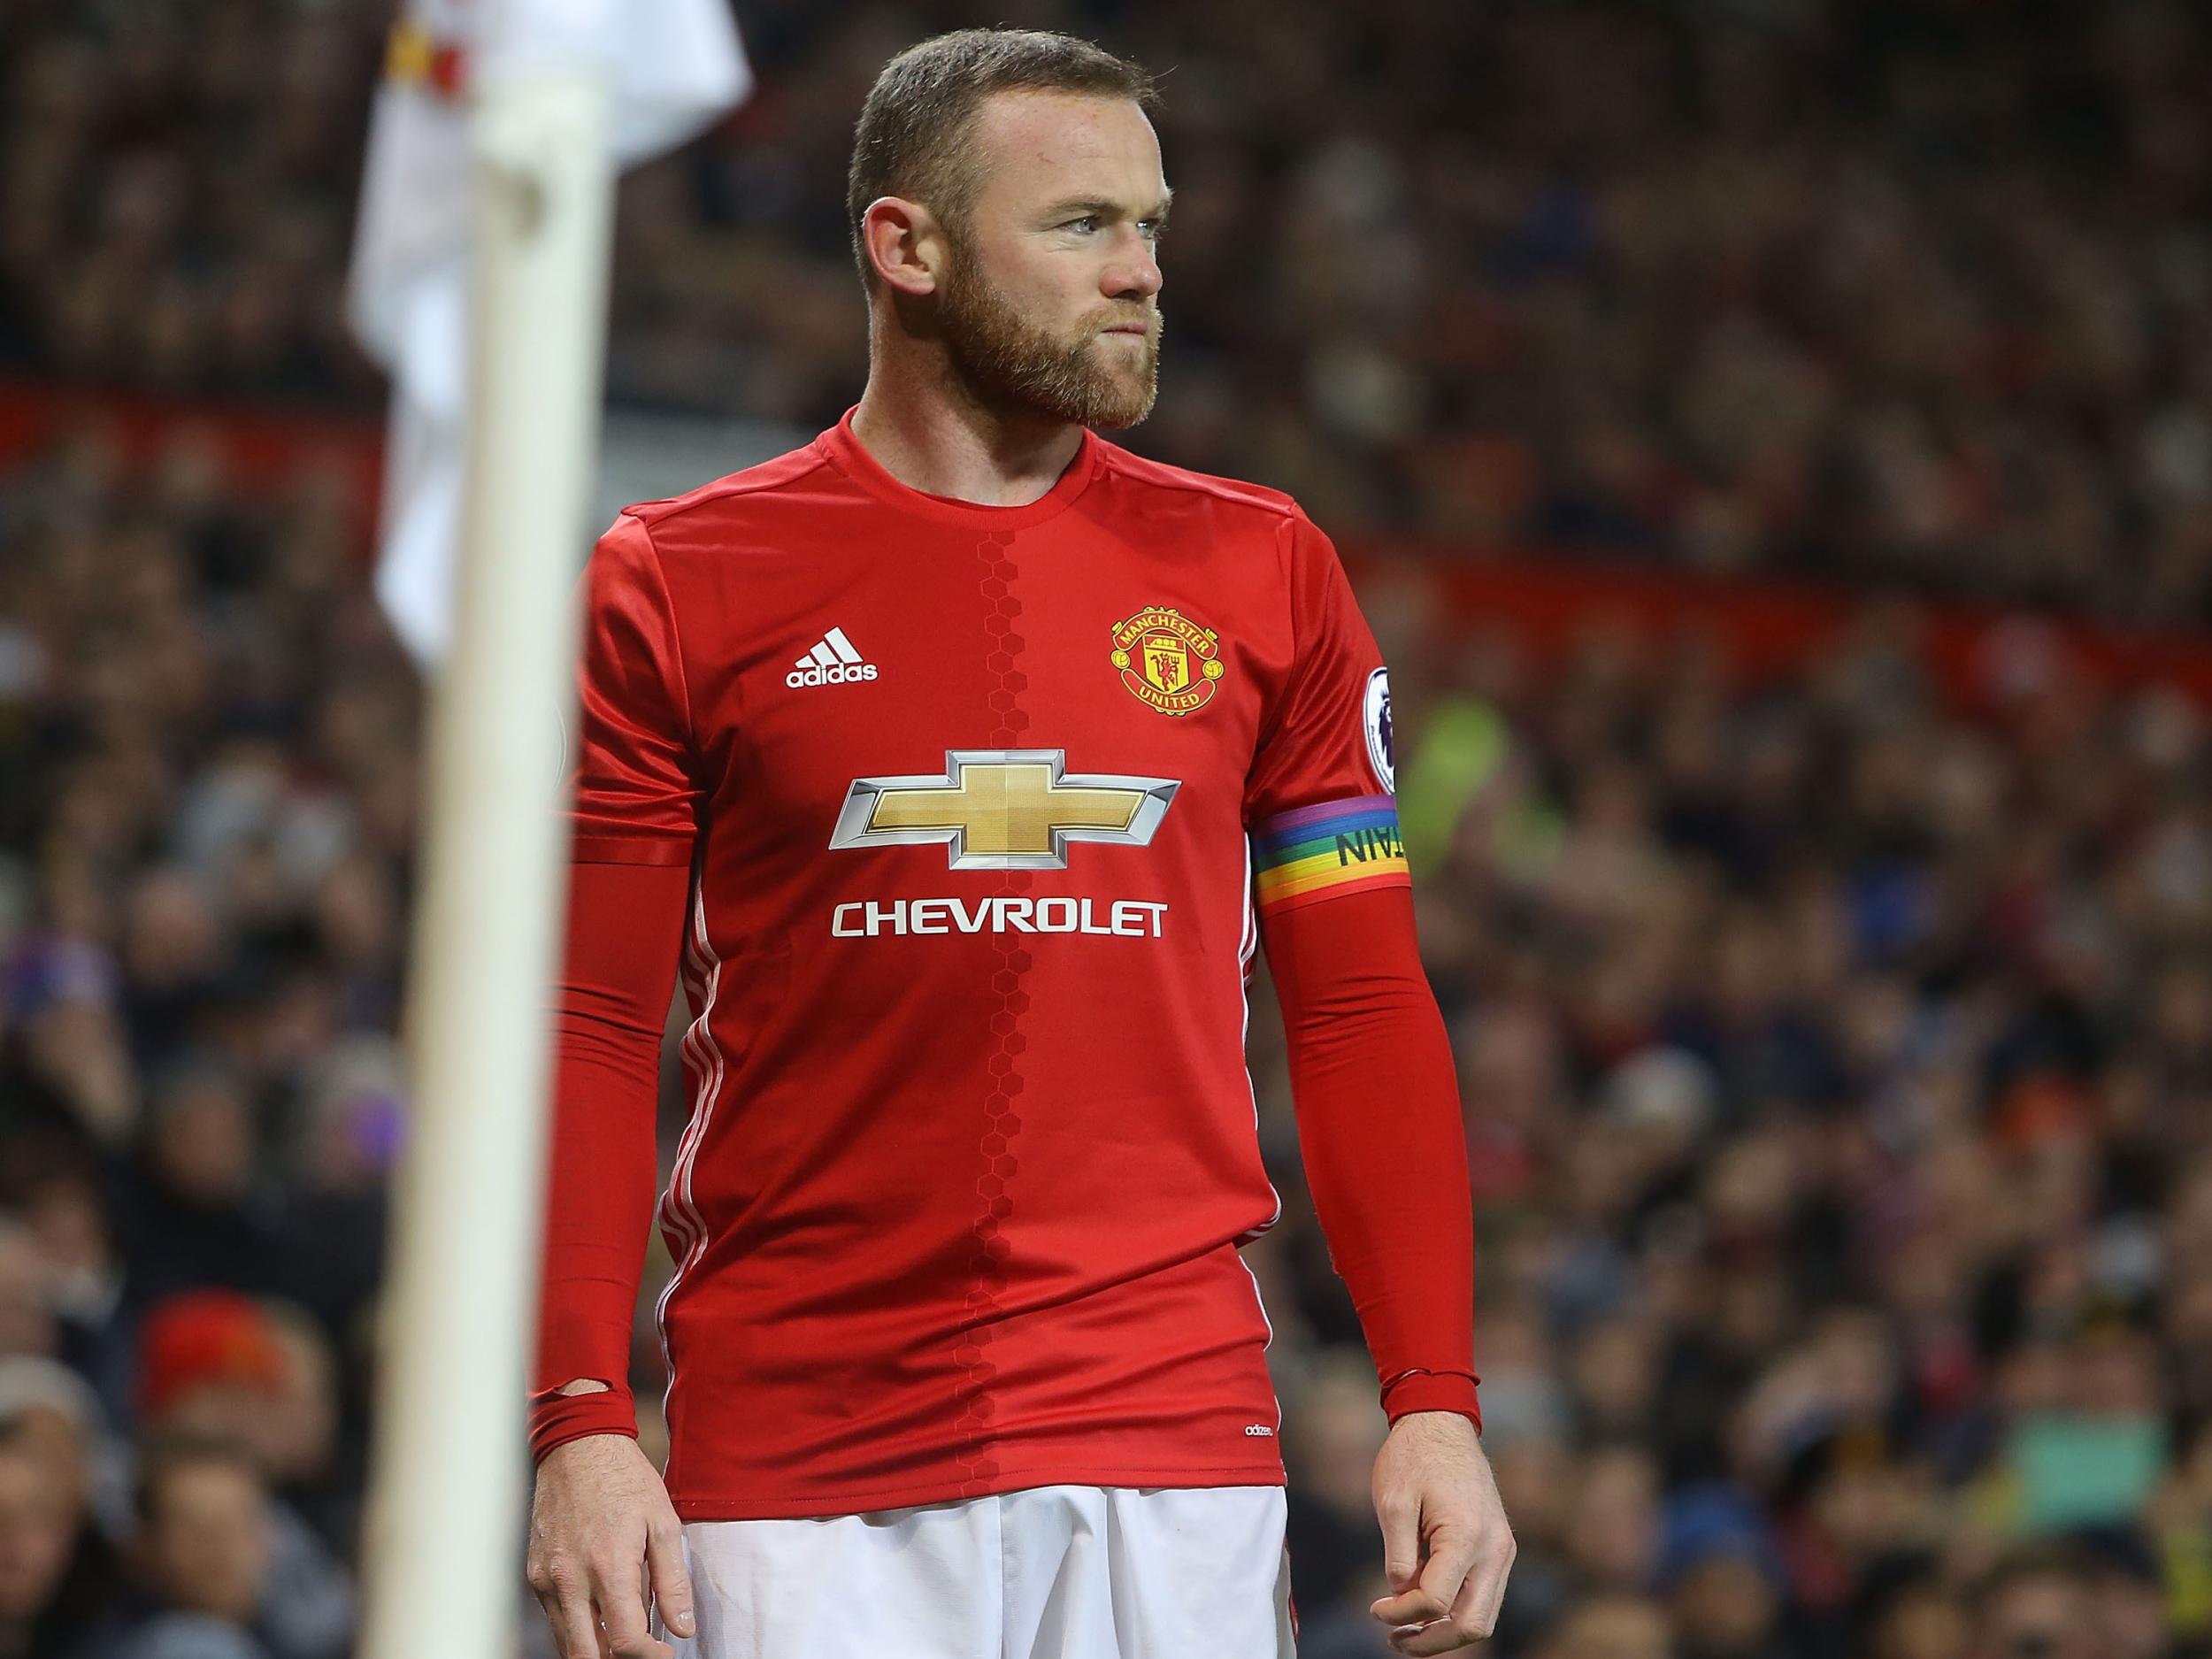 Rooney went to within one goal of Sir Bobby Charlton's Manchester United goalscoring record